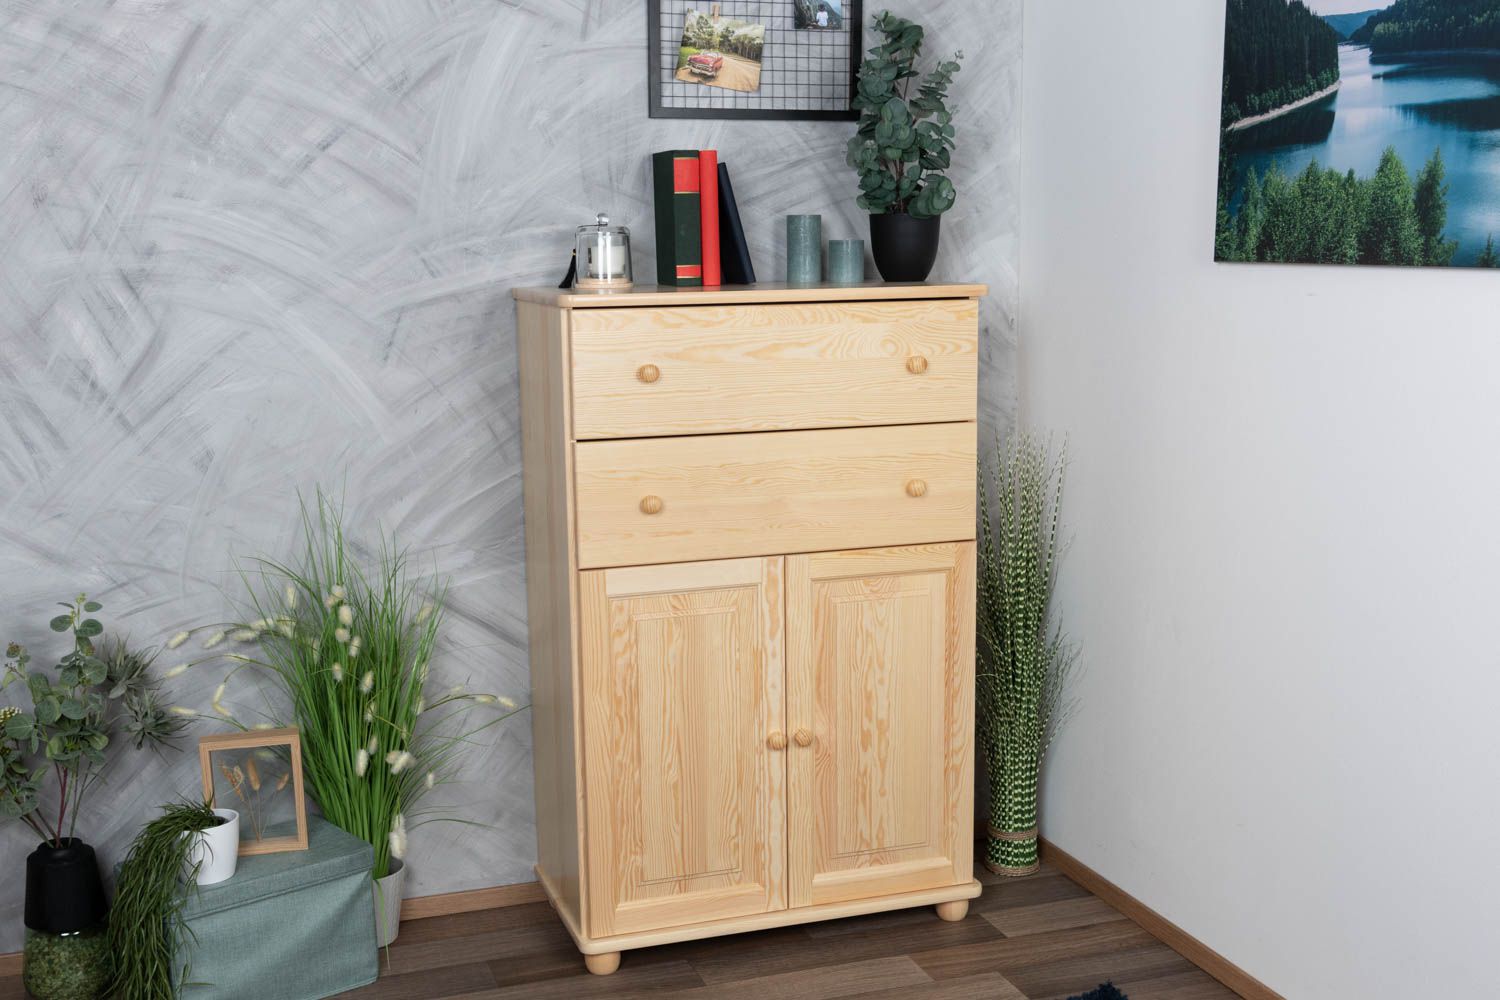 Chest of drawers solid pine solid wood natural Junco 160 - Dimensions 123 x 80 x 43 cm